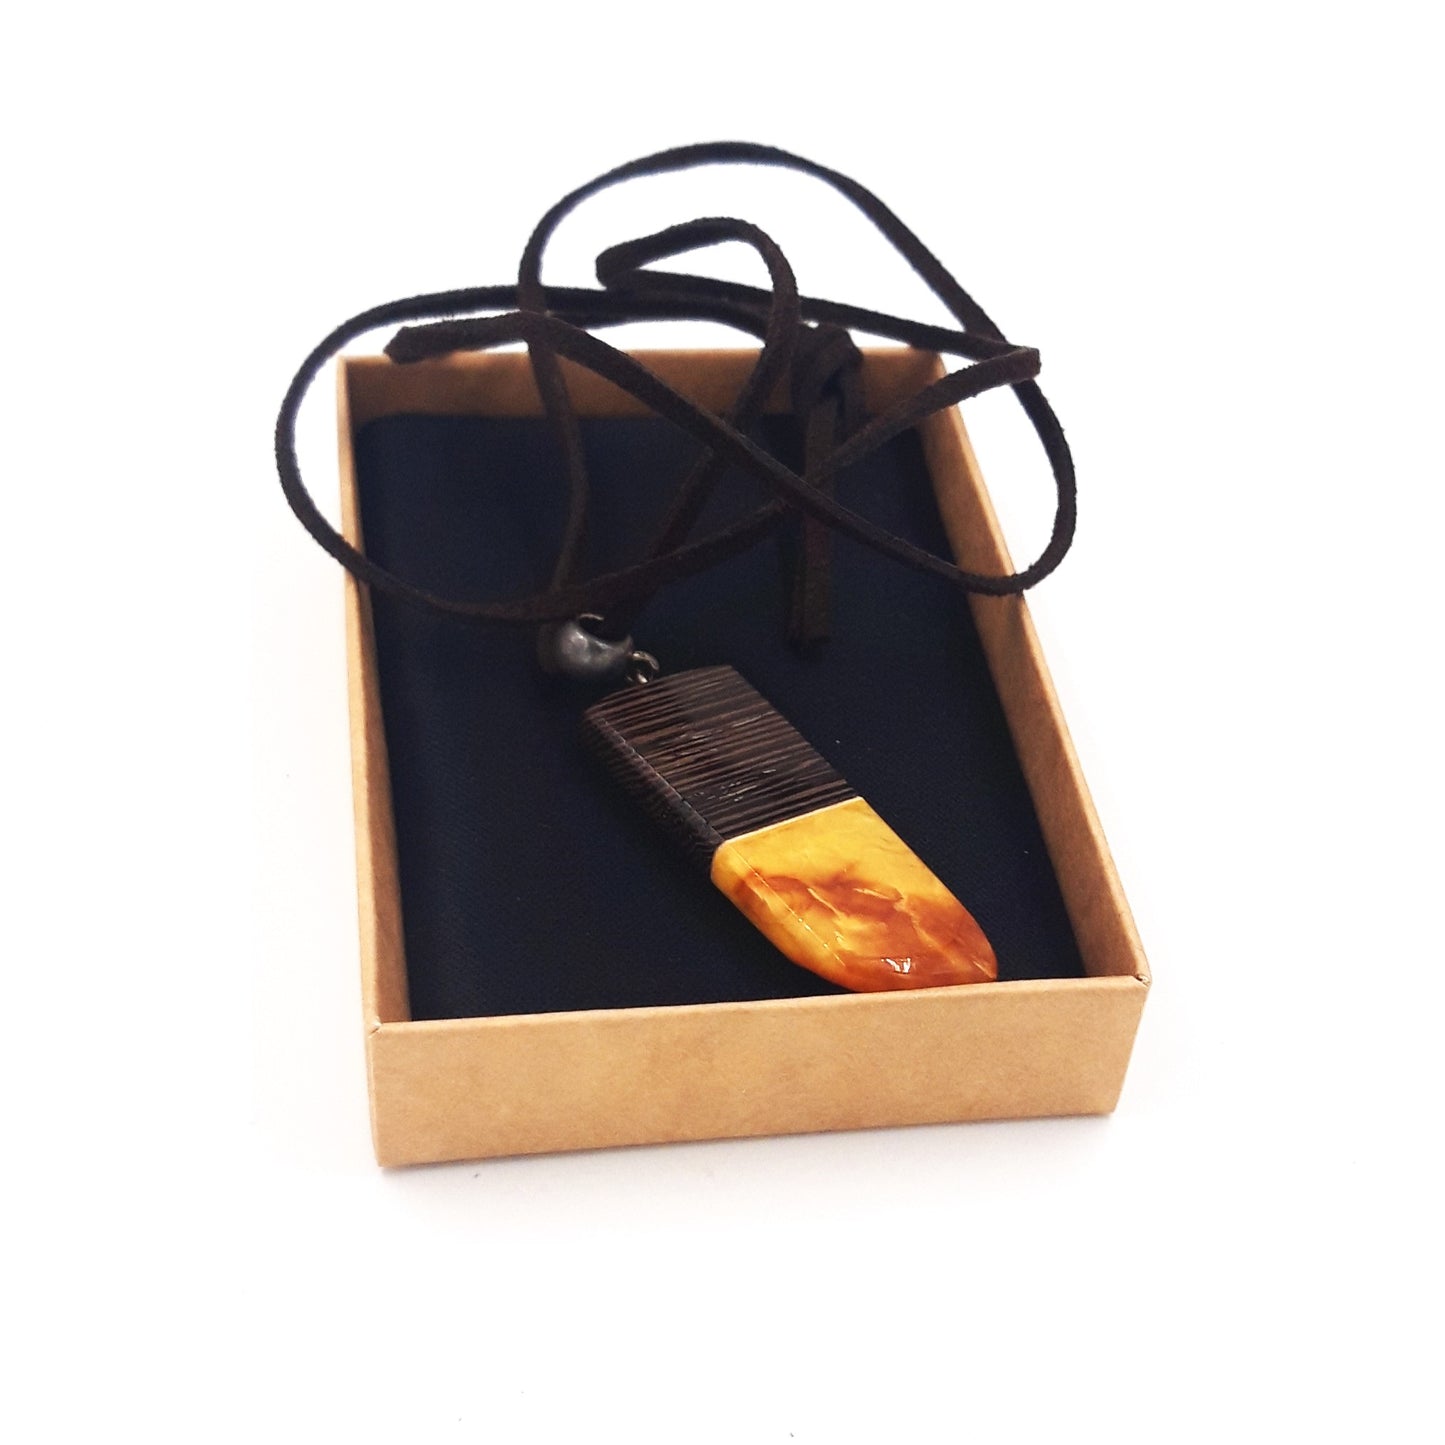 Baltic amber pendant with wood